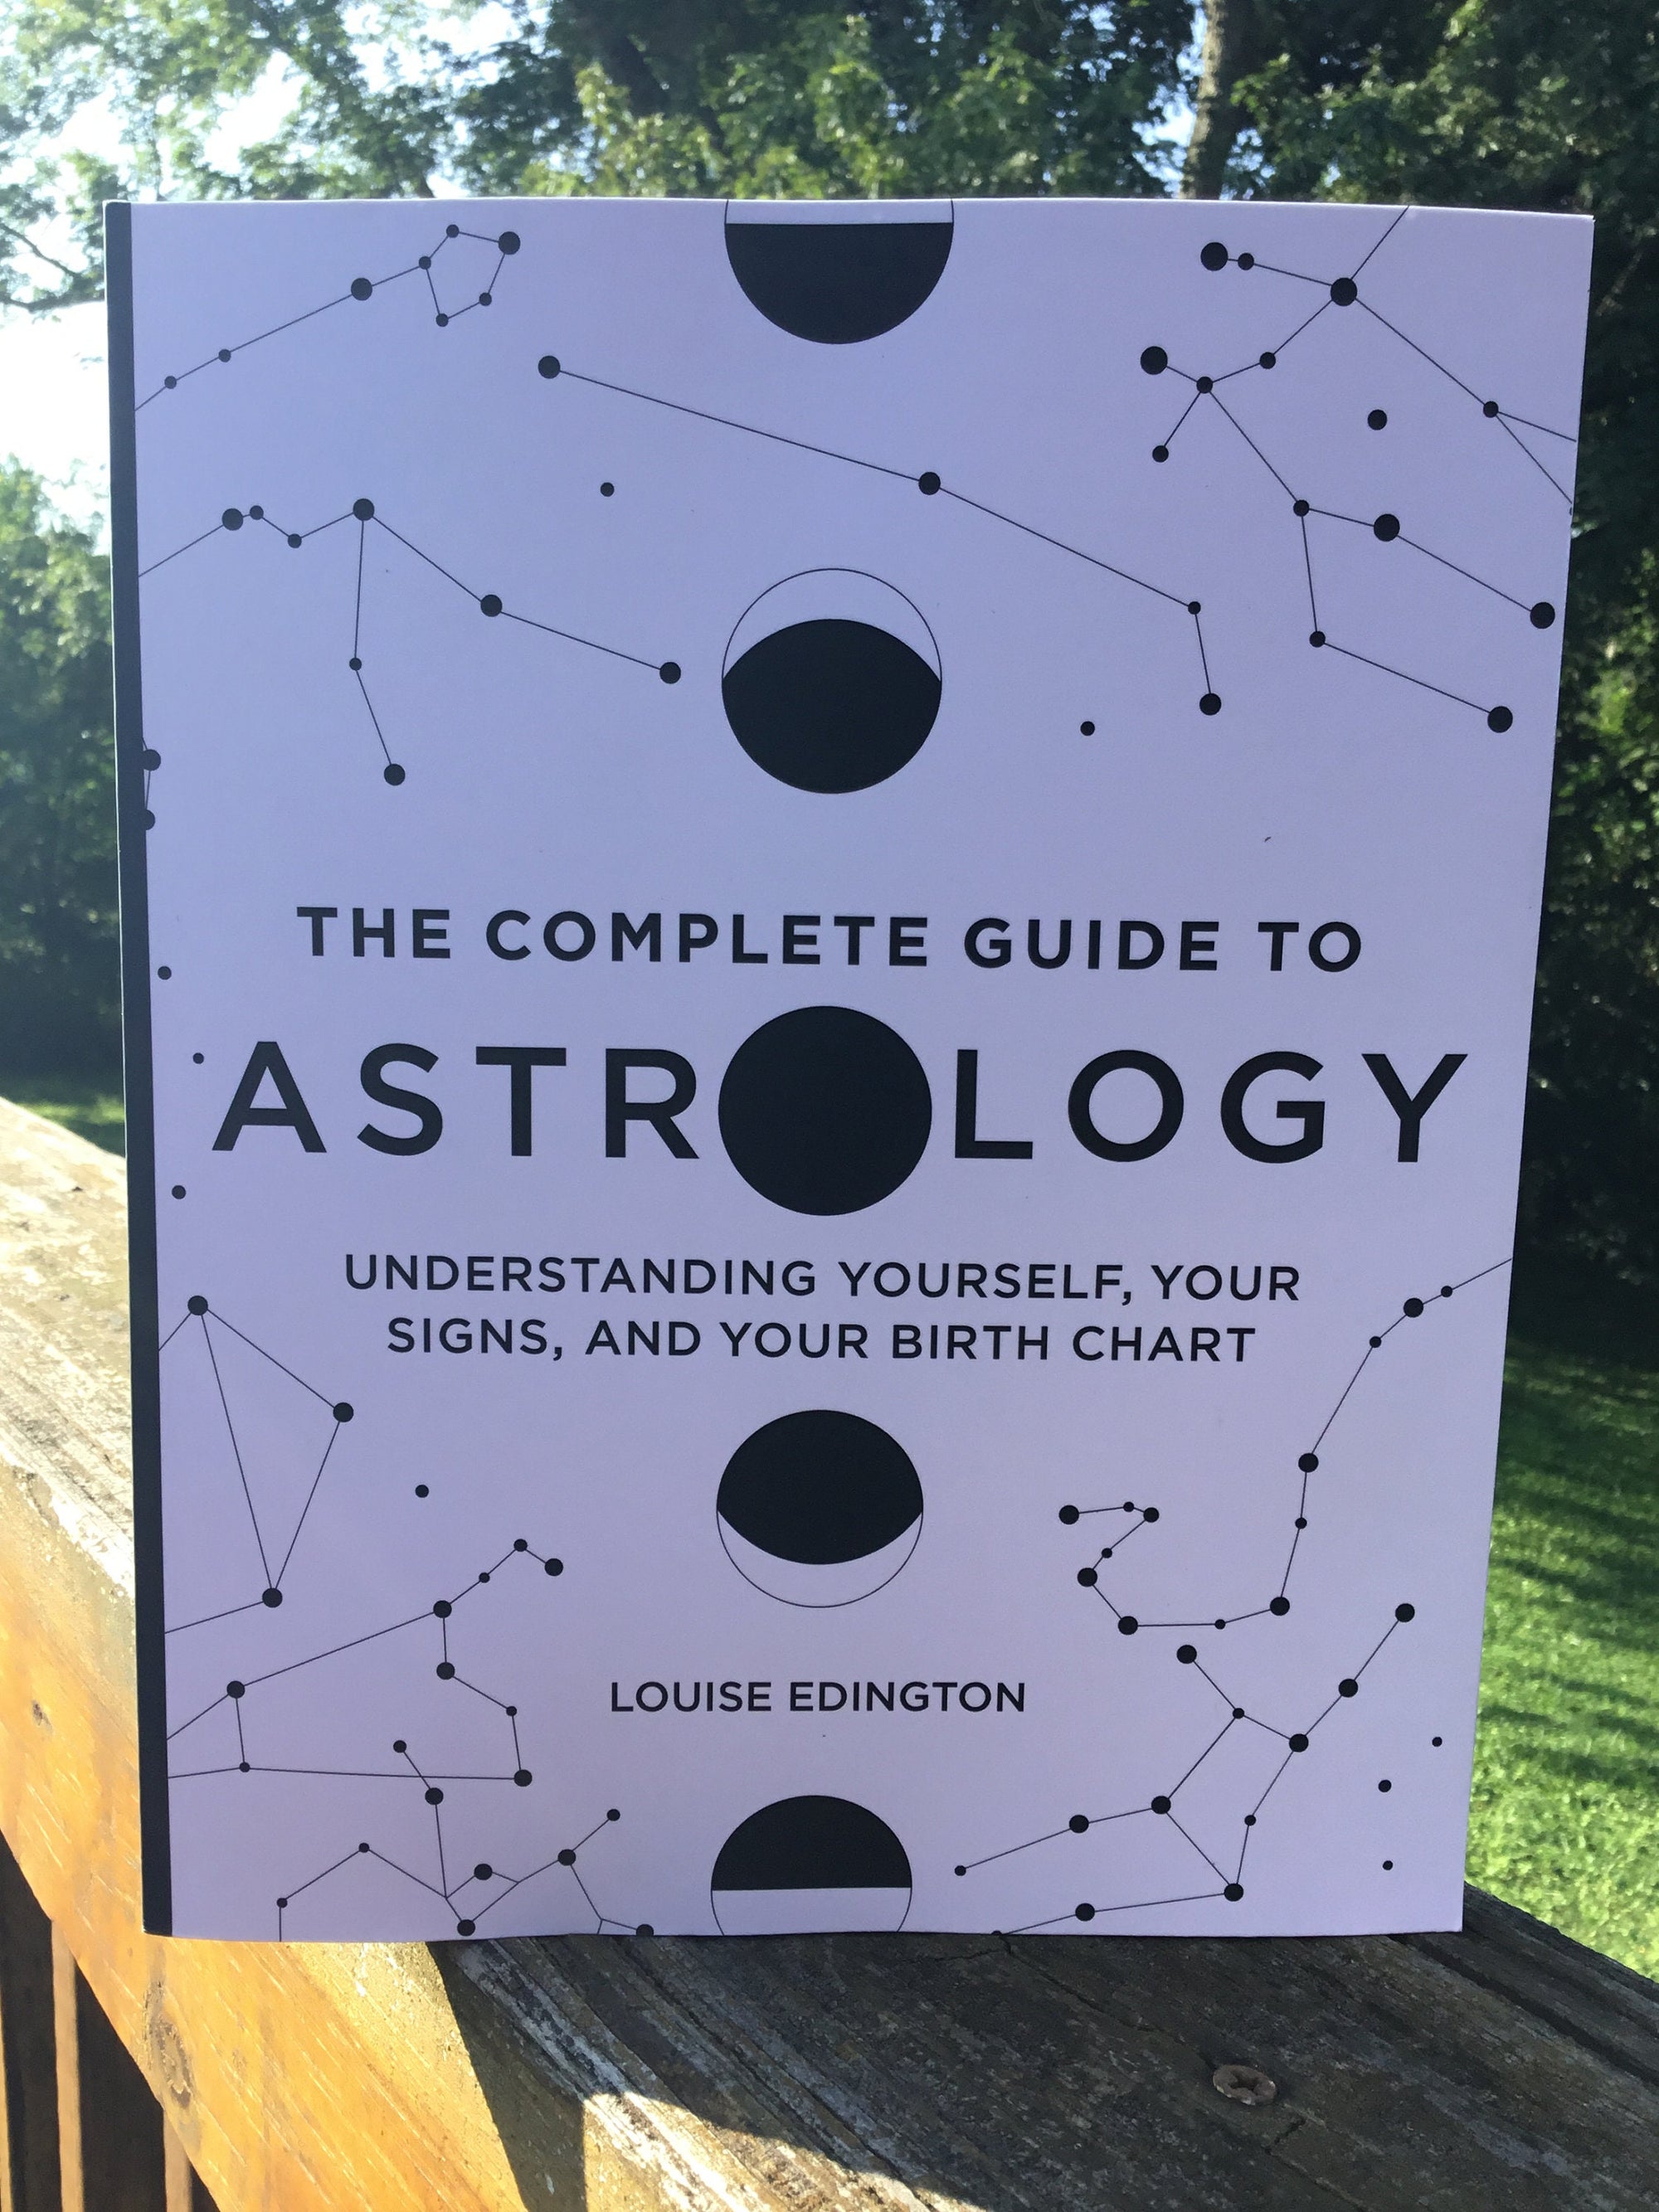 The Complete Guide To Astrology, Astrology, Understanding Yourself, Your Signs, And Your BirthChart